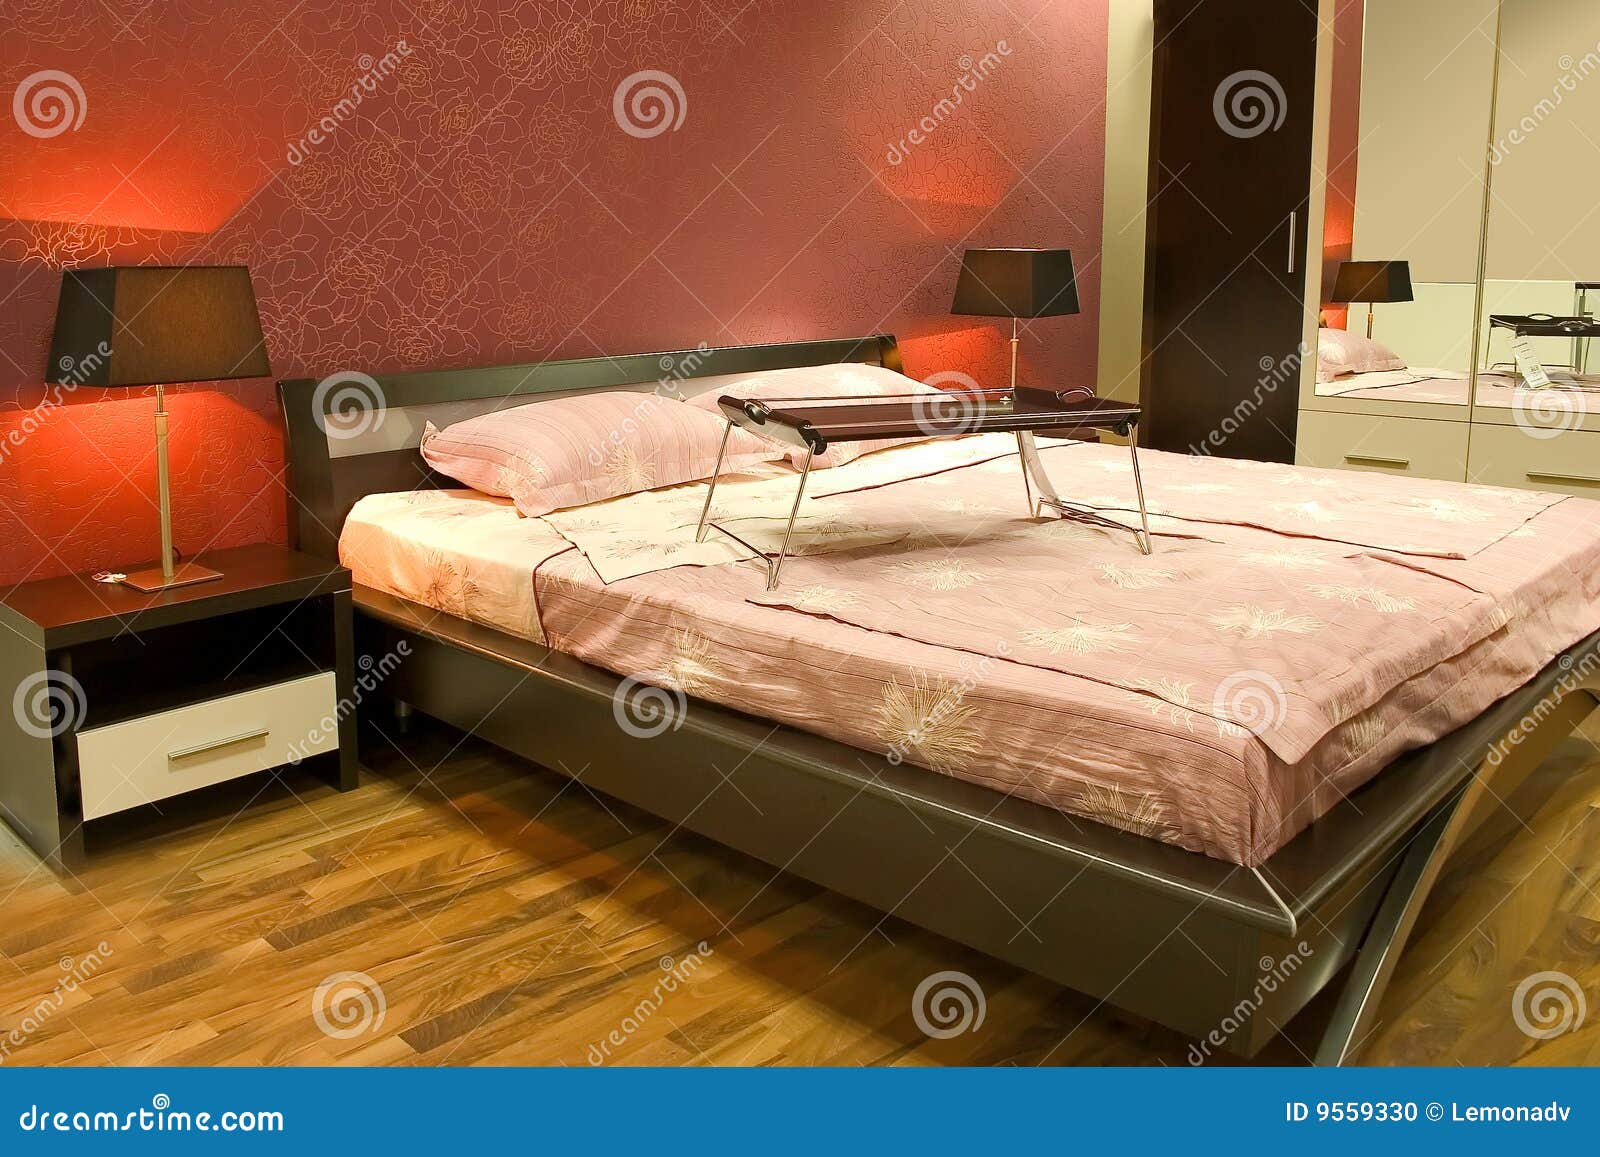 Interior Of Modern Red Bedroom Stock Photo - Image of ...
